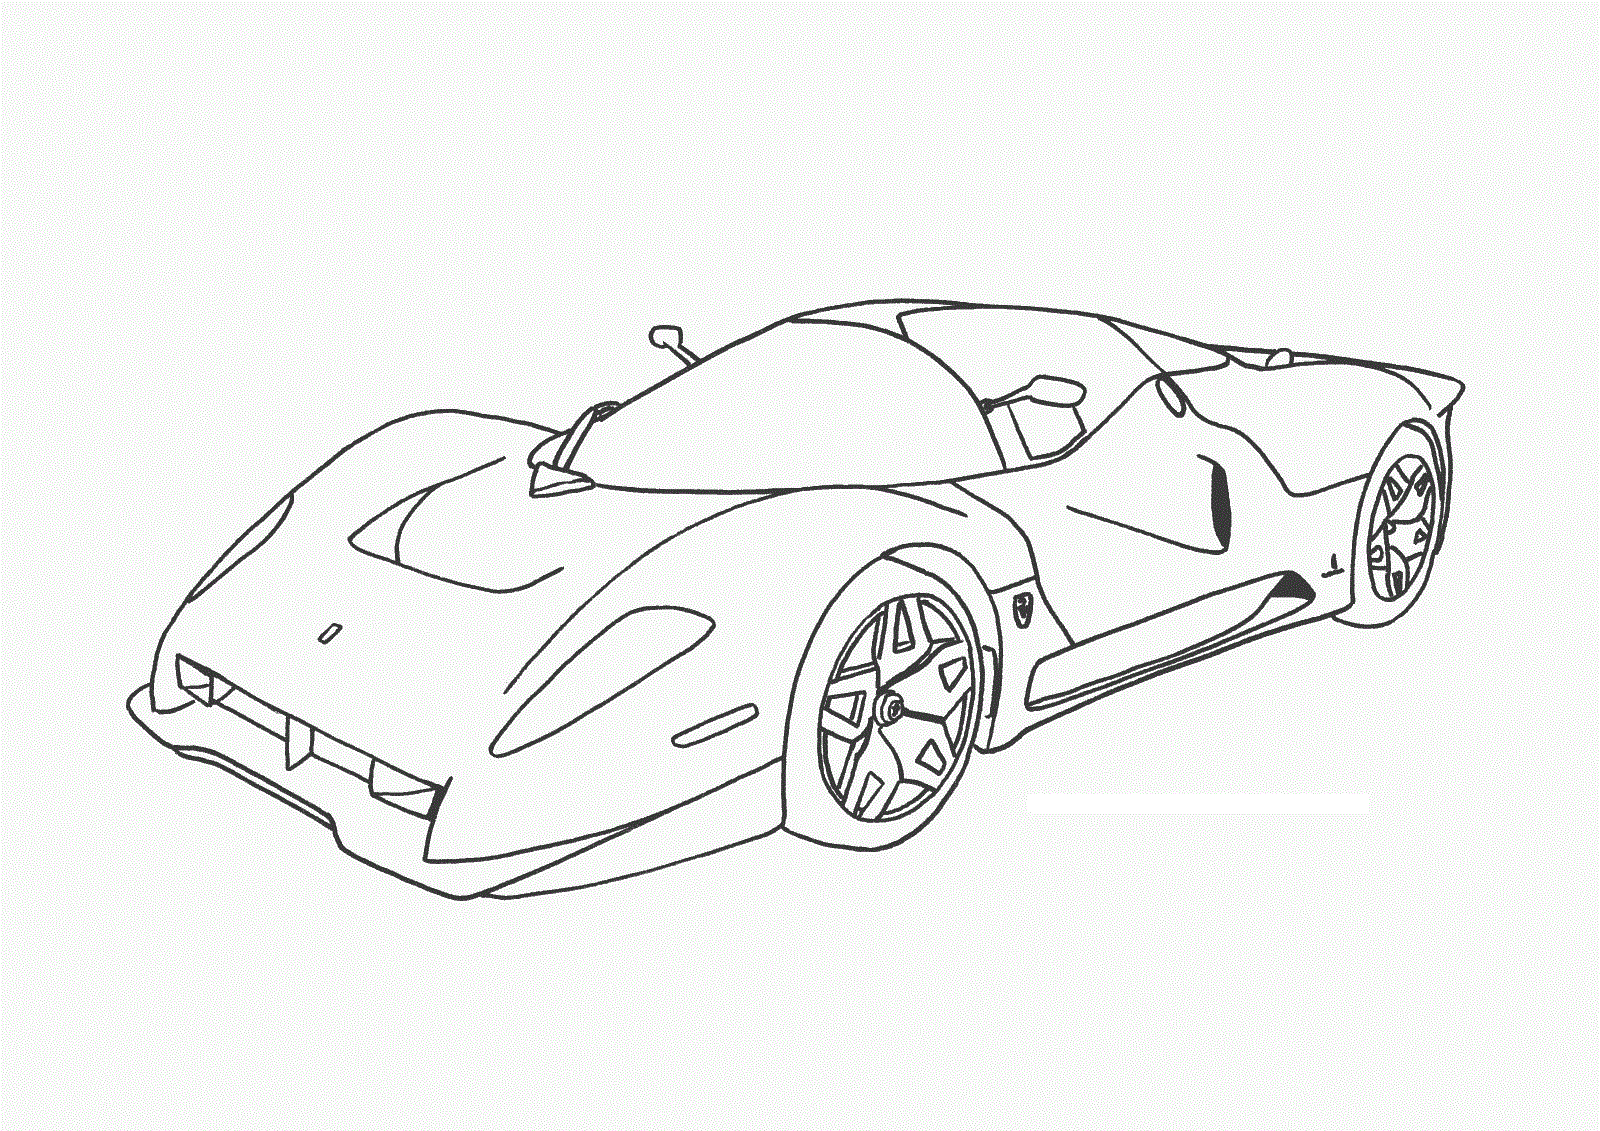 Download Free Printable Race Car Coloring Pages For Kids